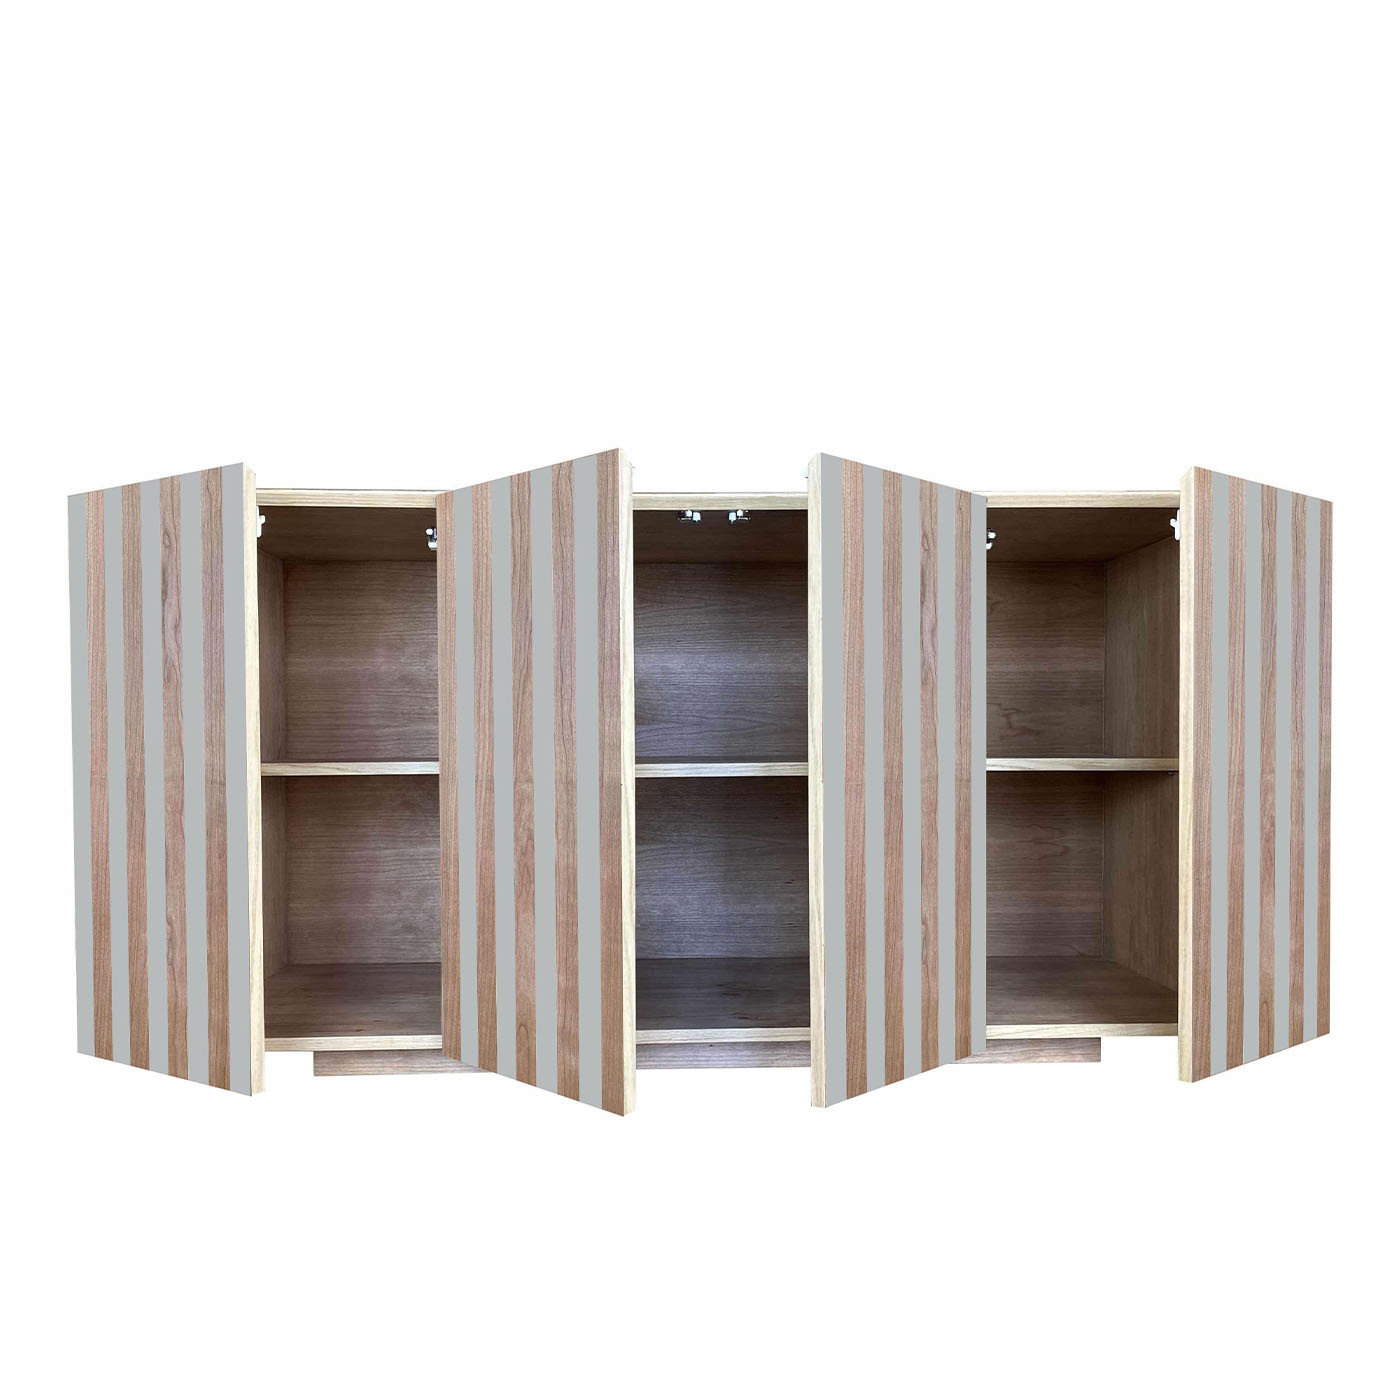 Md2 4-Door Striped Sideboard by Meccani Studio - Alternative view 5